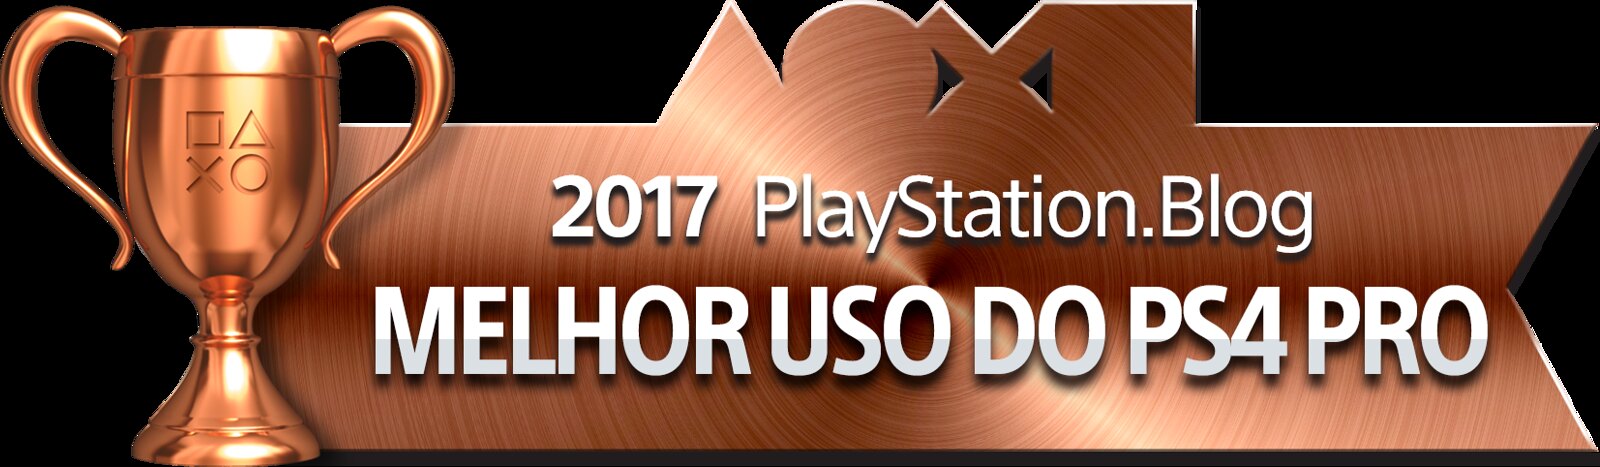 PlayStation Blog Game of the Year 2017 - Best Use of PS4 Pro (Bronze)